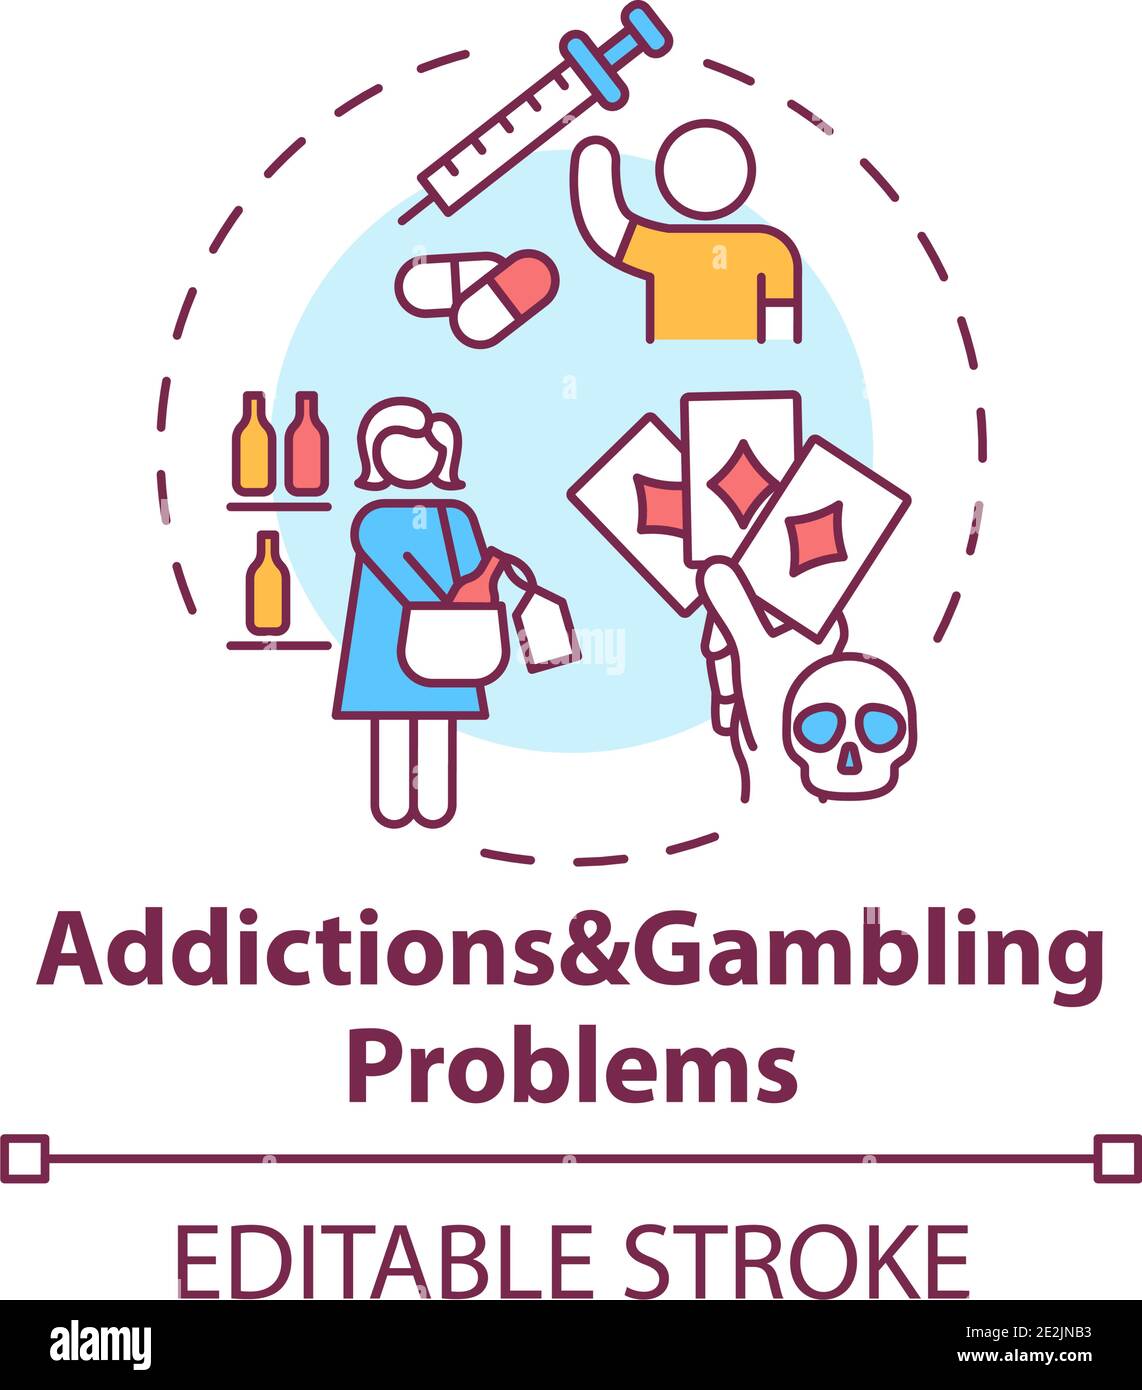 Addictions and gambling problems concept icon Stock Vector